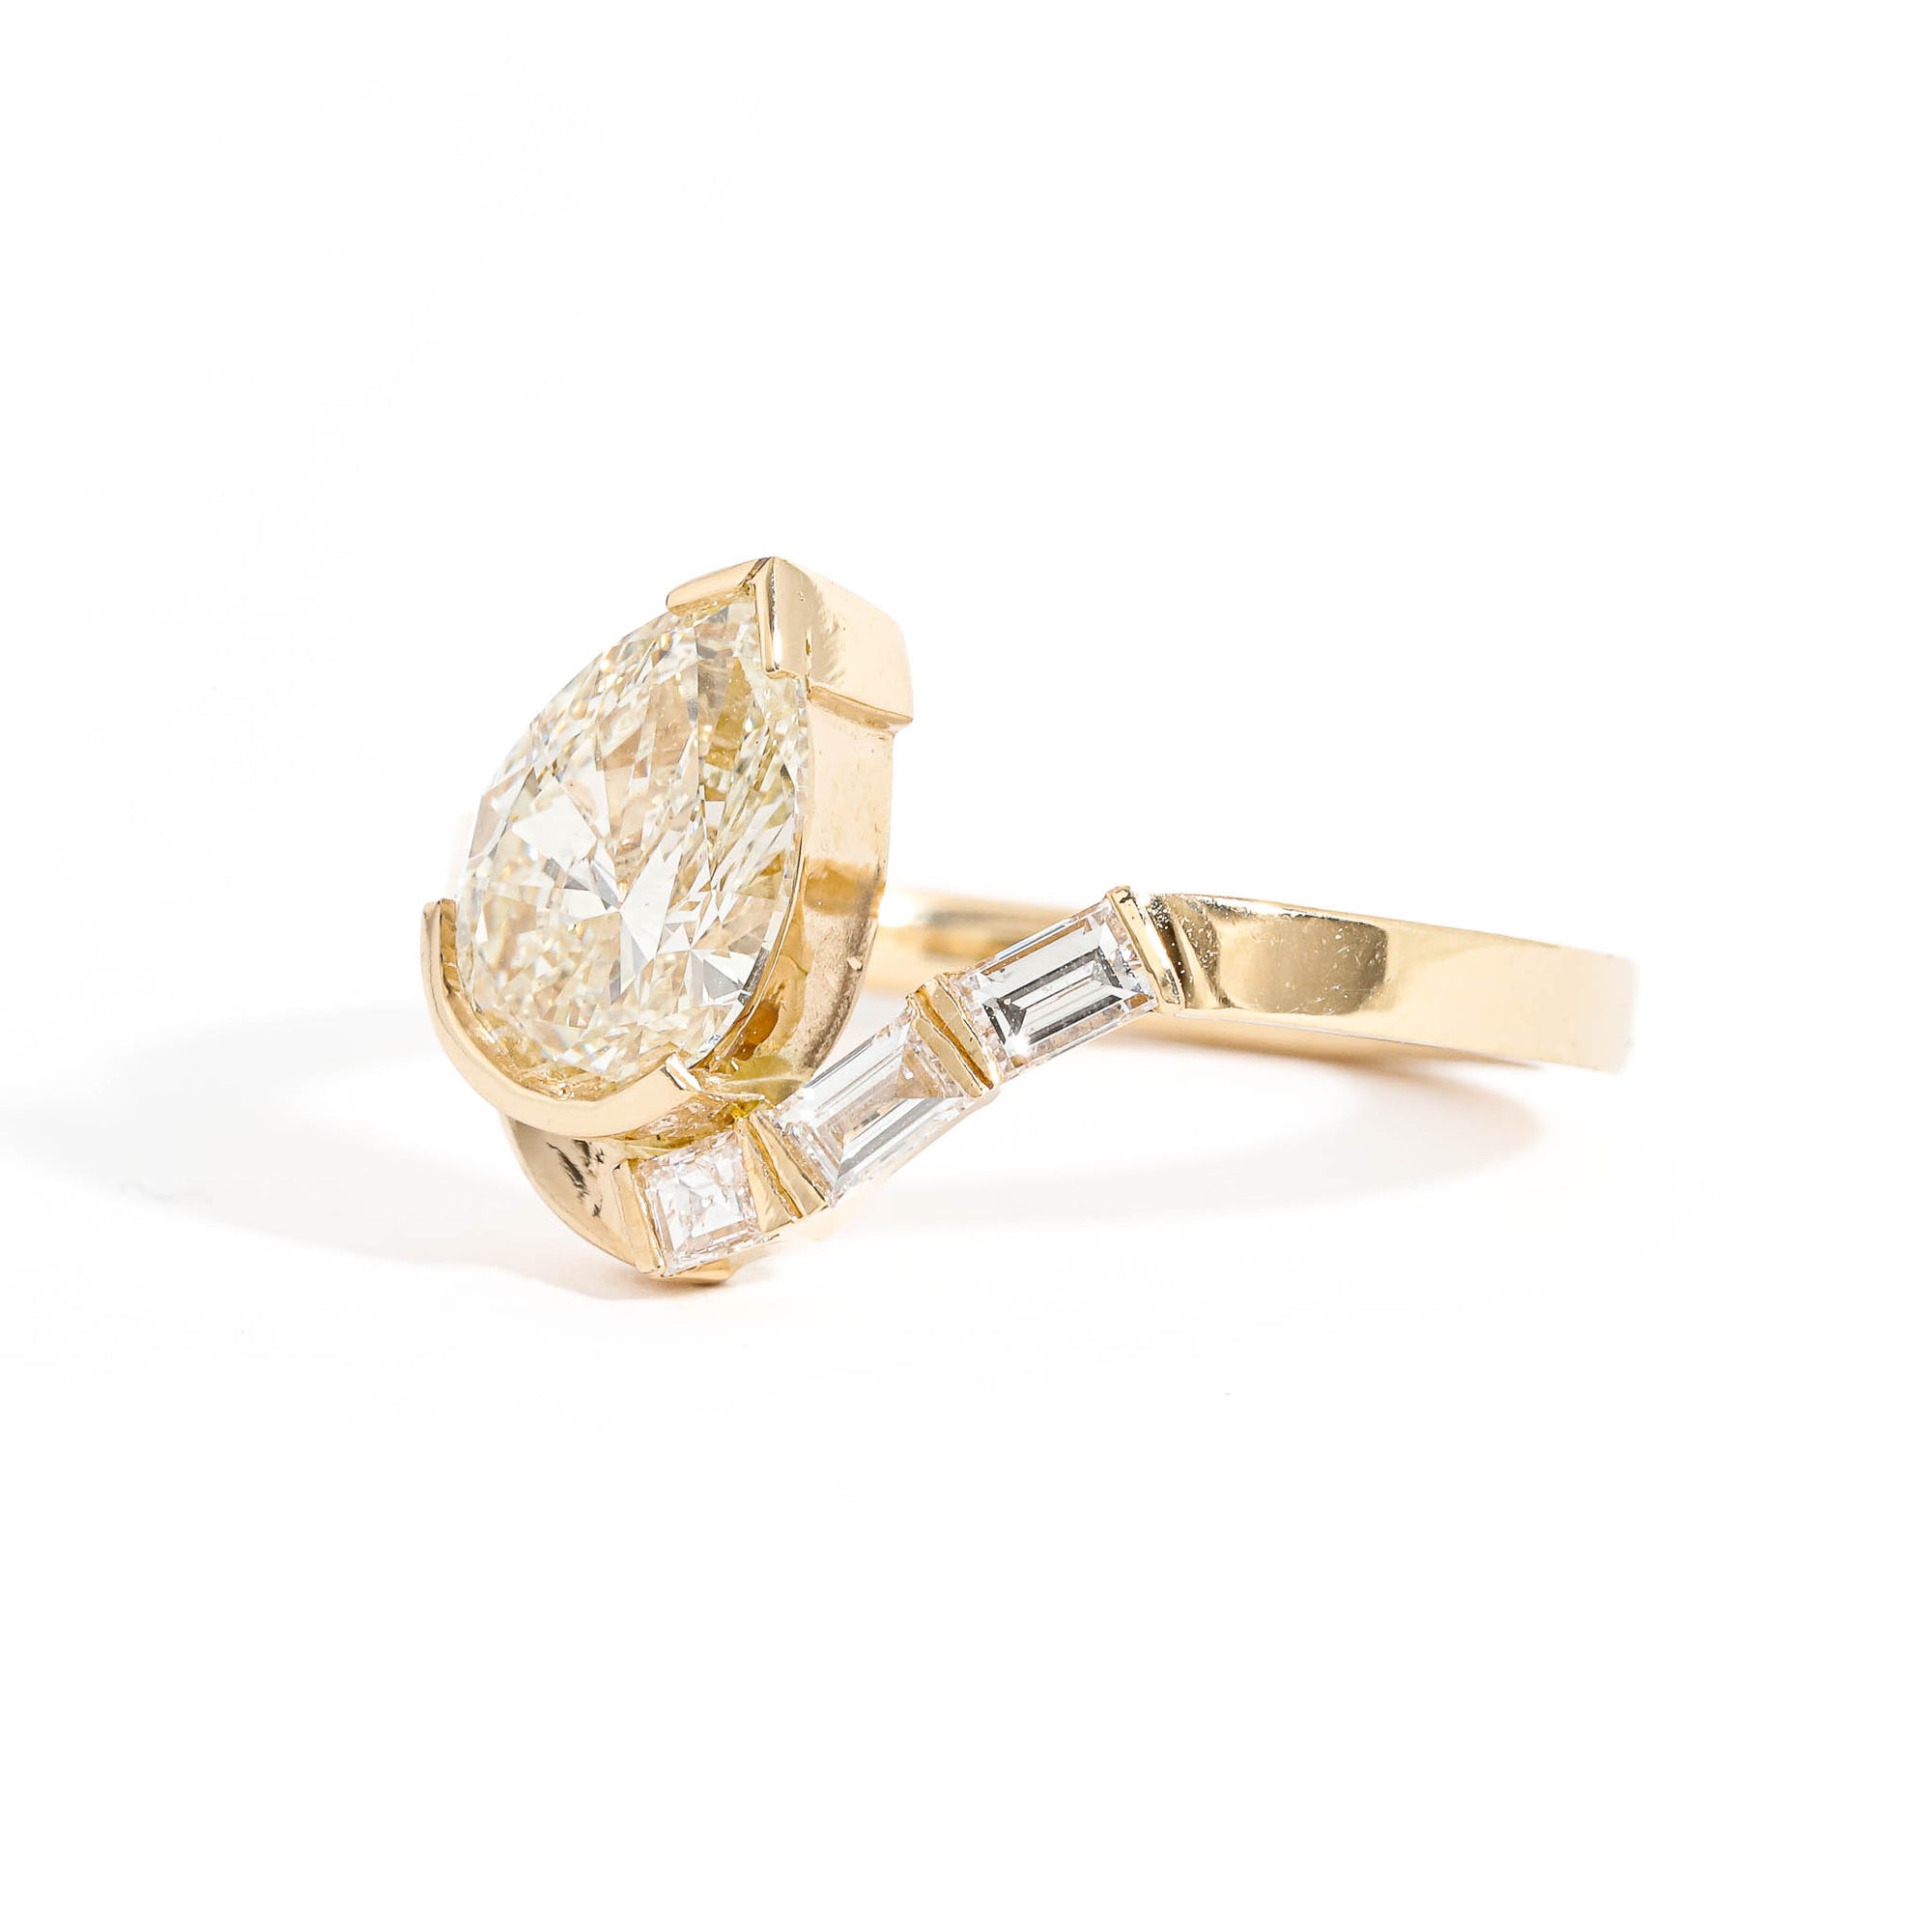  Pear Cut and Baguette Cut White Diamond Engagement Ring in 18 Carat Yellow Gold